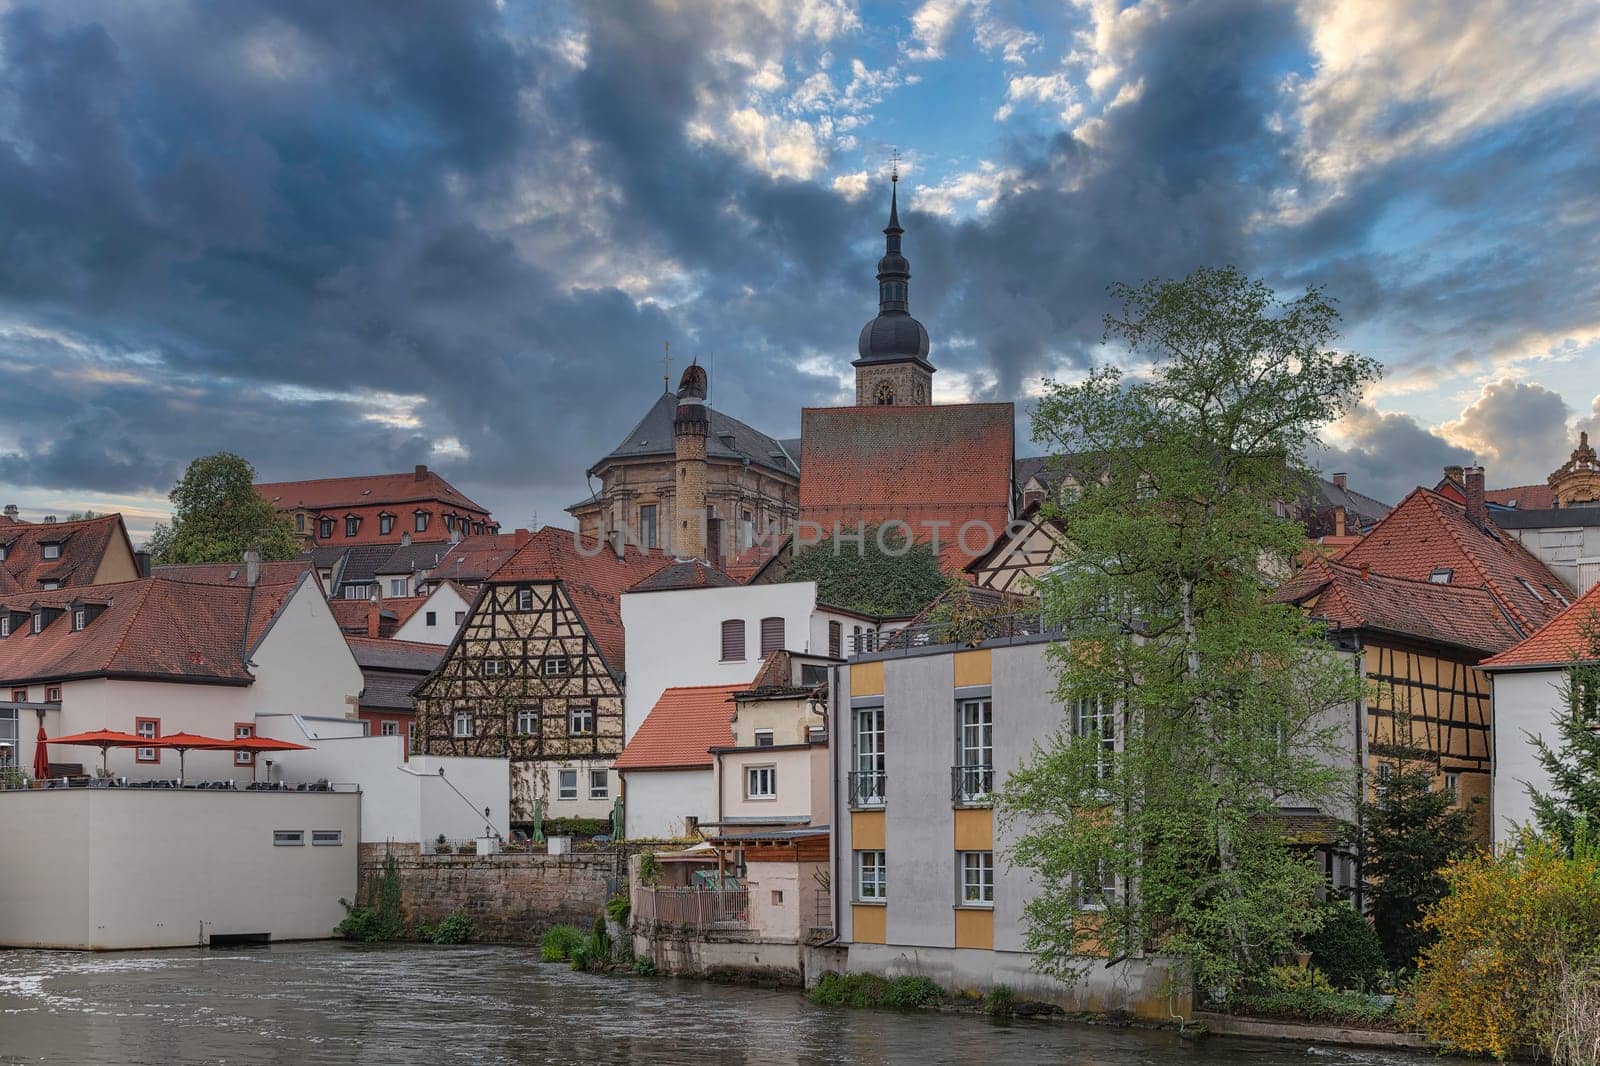 Old town Bamberg in Bavaria, Germany by mot1963